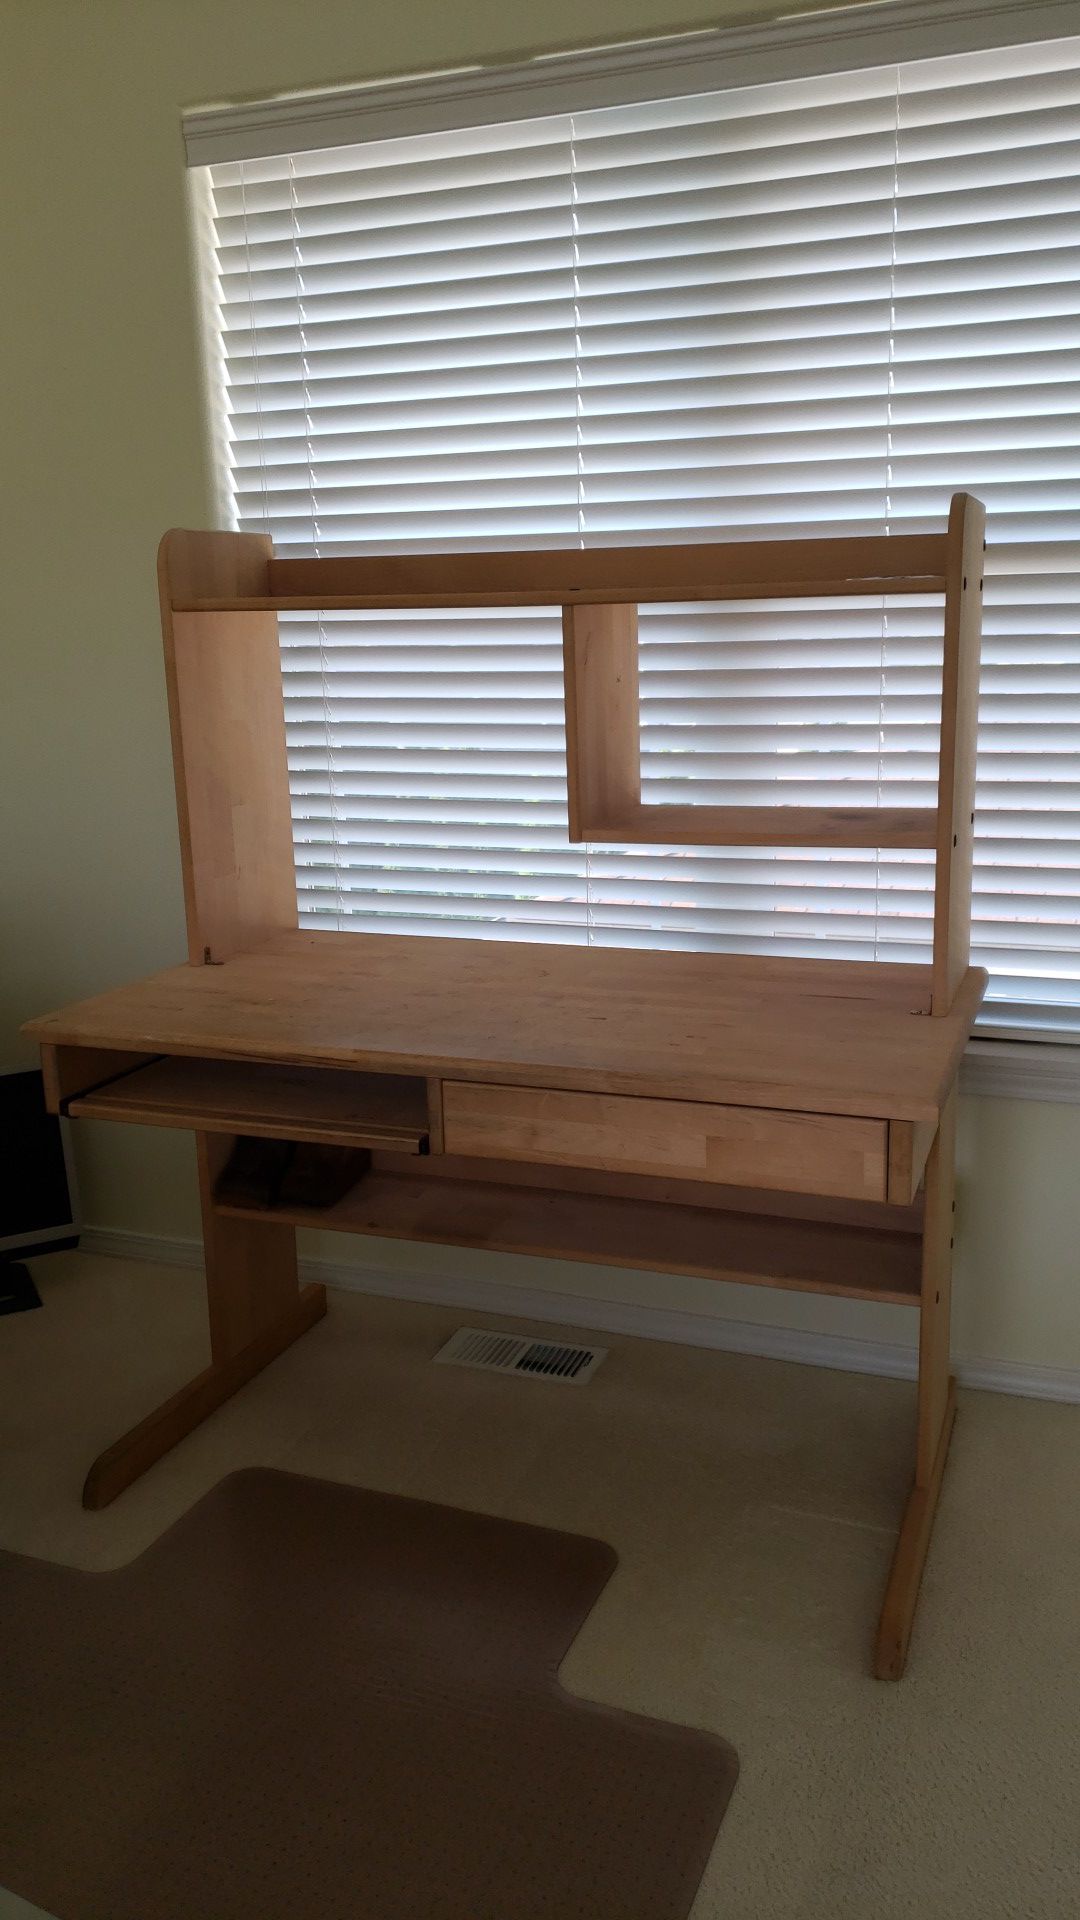 Solid wood computer desk with keyboard tray. Computer, printer and speakers NOT INCLUDED